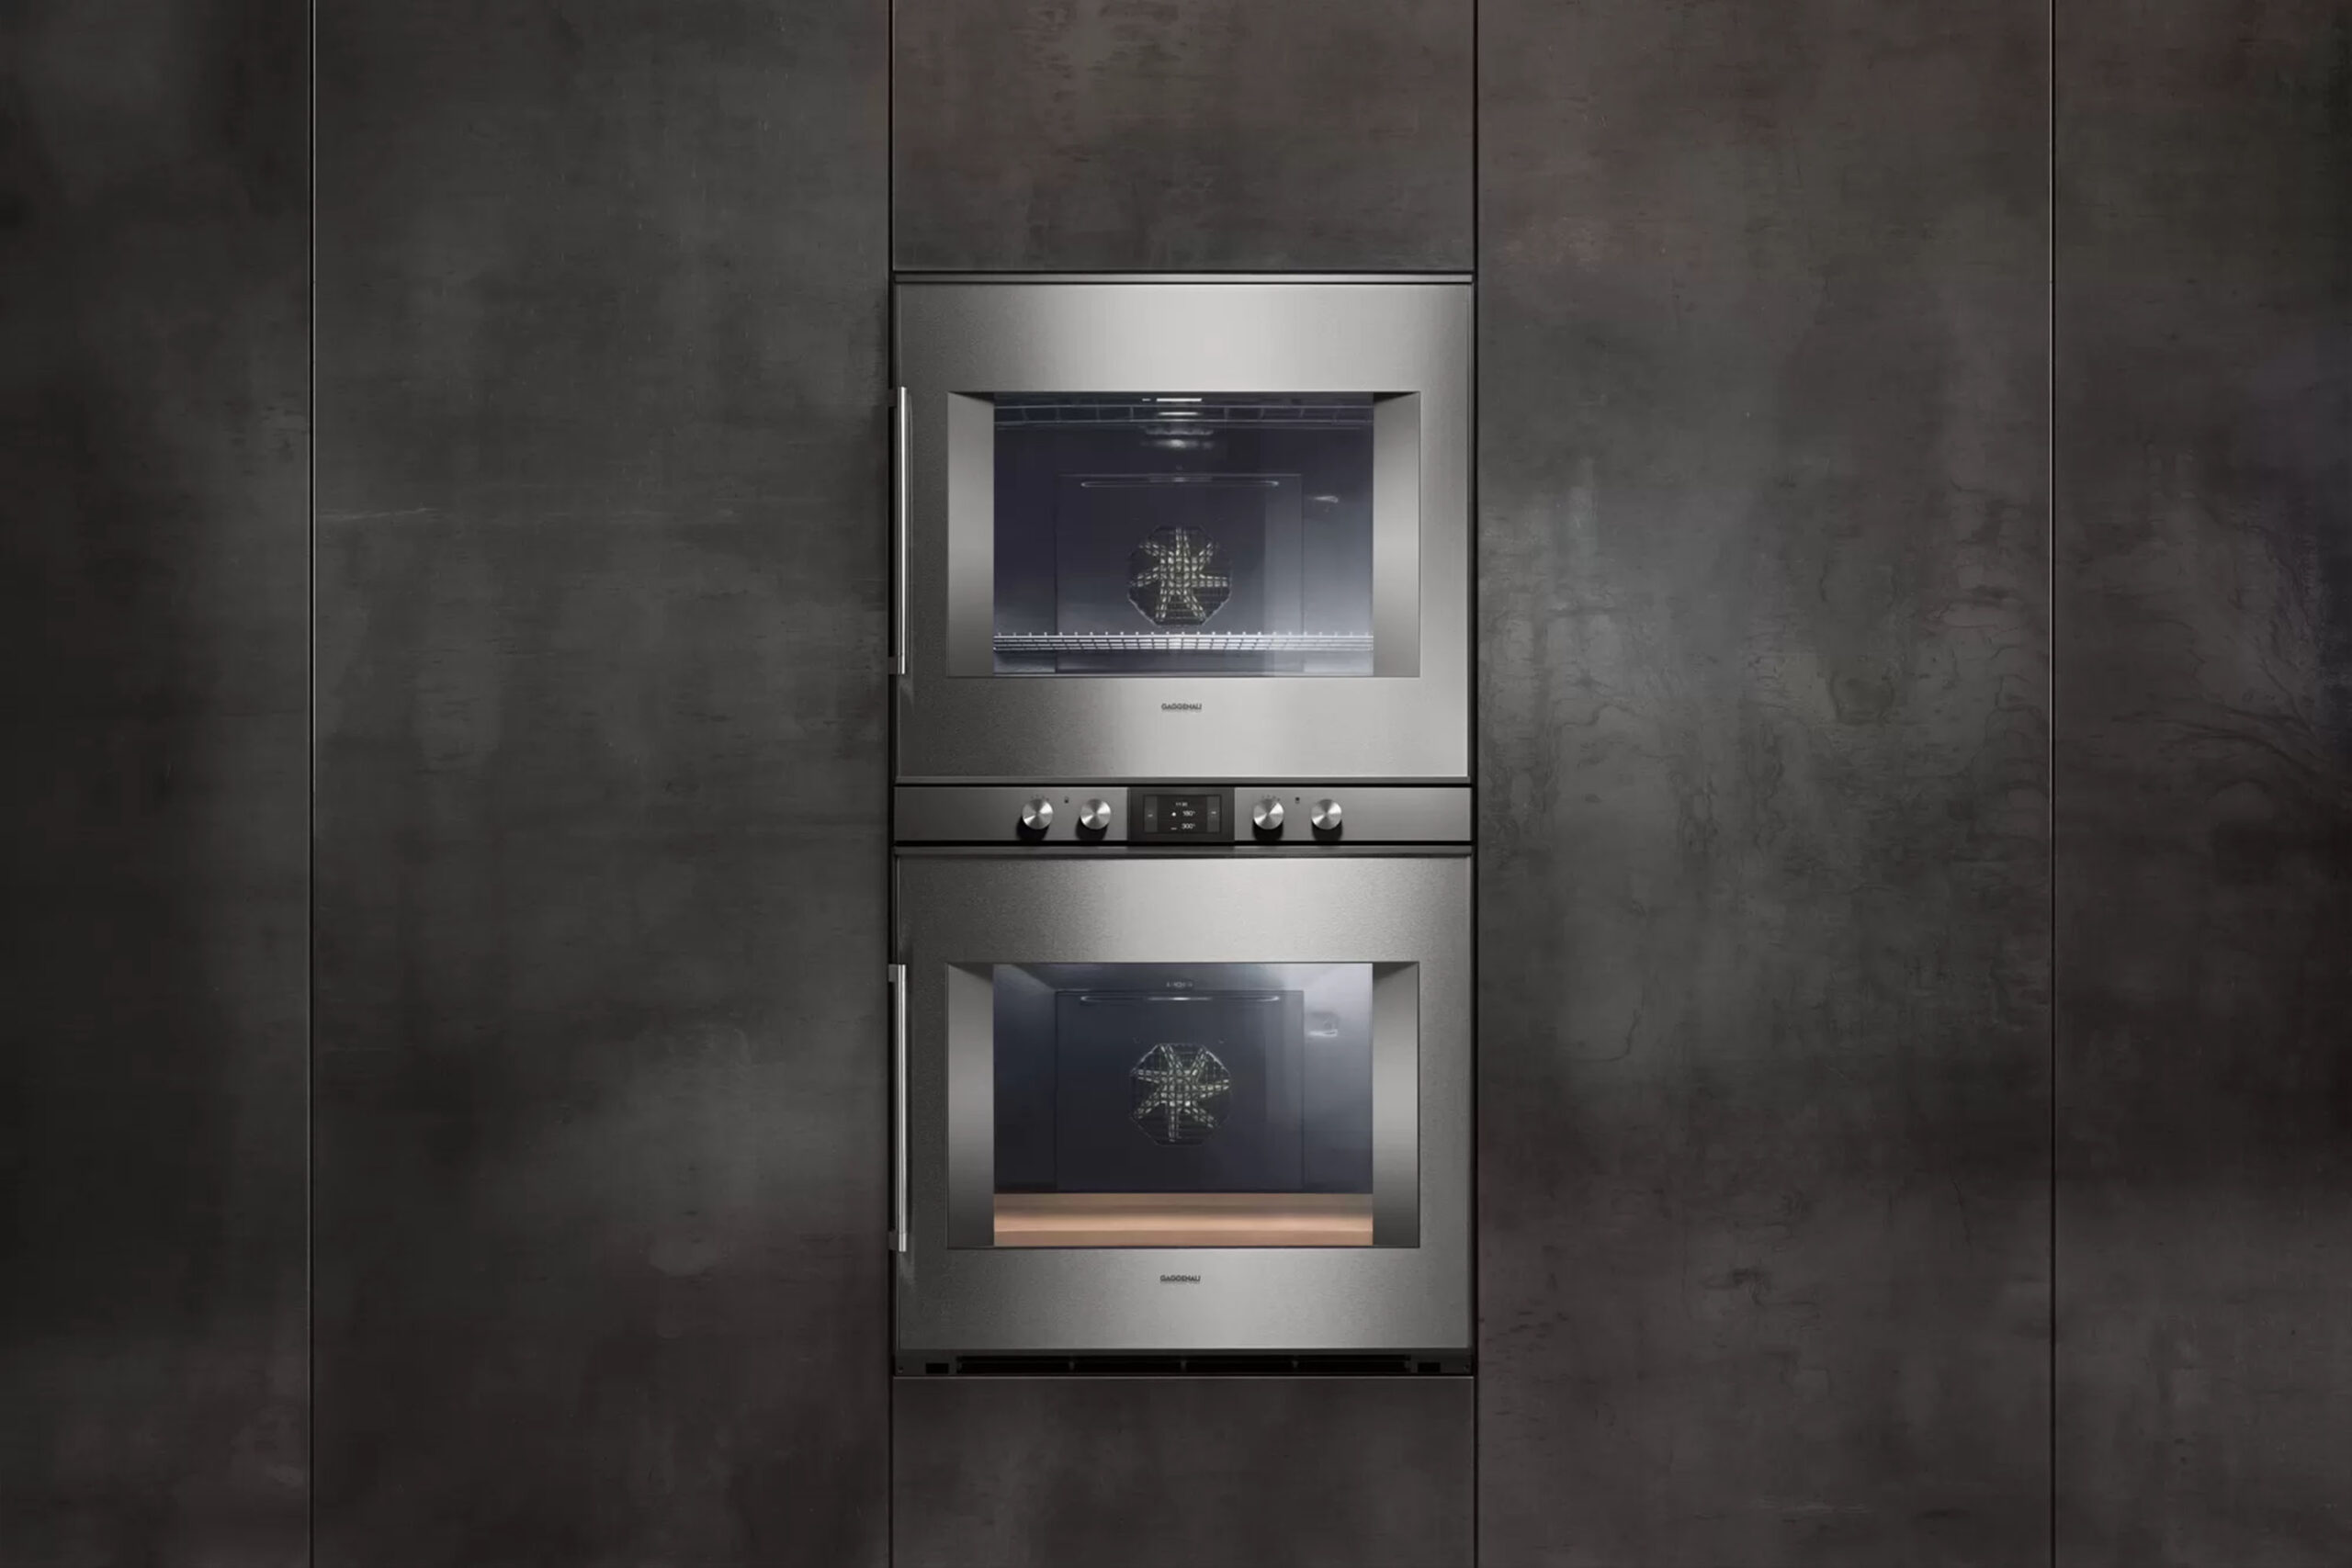 Luxury kitchen appliance brand Gaggenau 400 series double oven. Buy in the UK with Krieder.